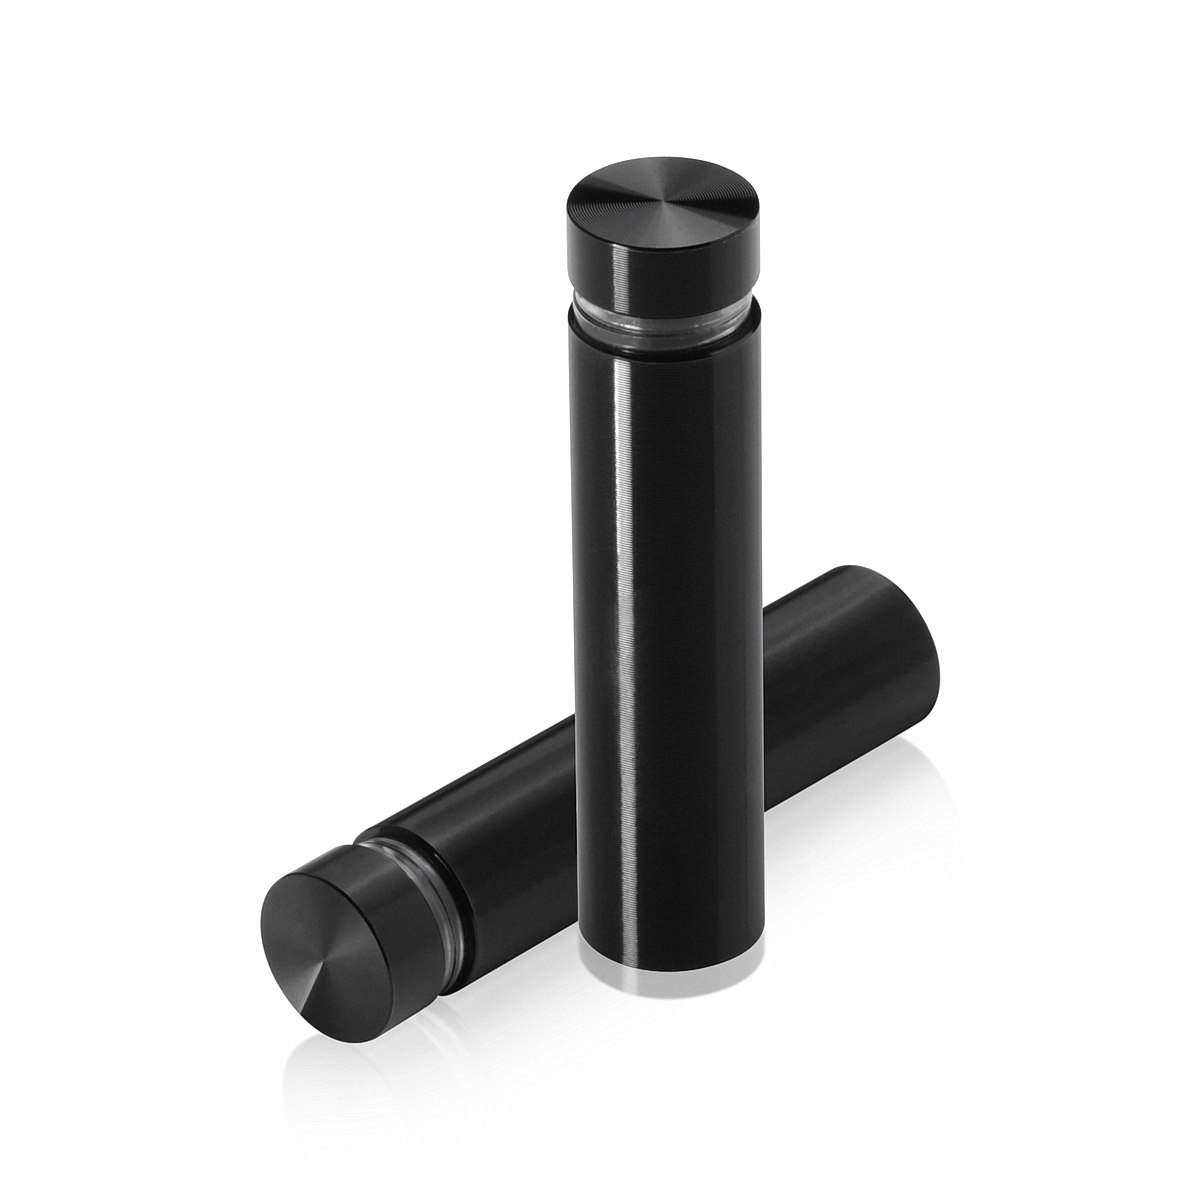 1/2'' Diameter X 1-3/4'' Barrel Length, Aluminum Flat Head Standoffs, Black Anodized Finish Easy Fasten Standoff (For Inside / Outside use) Tamper Proof Standoff [Required Material Hole Size: 3/8'']